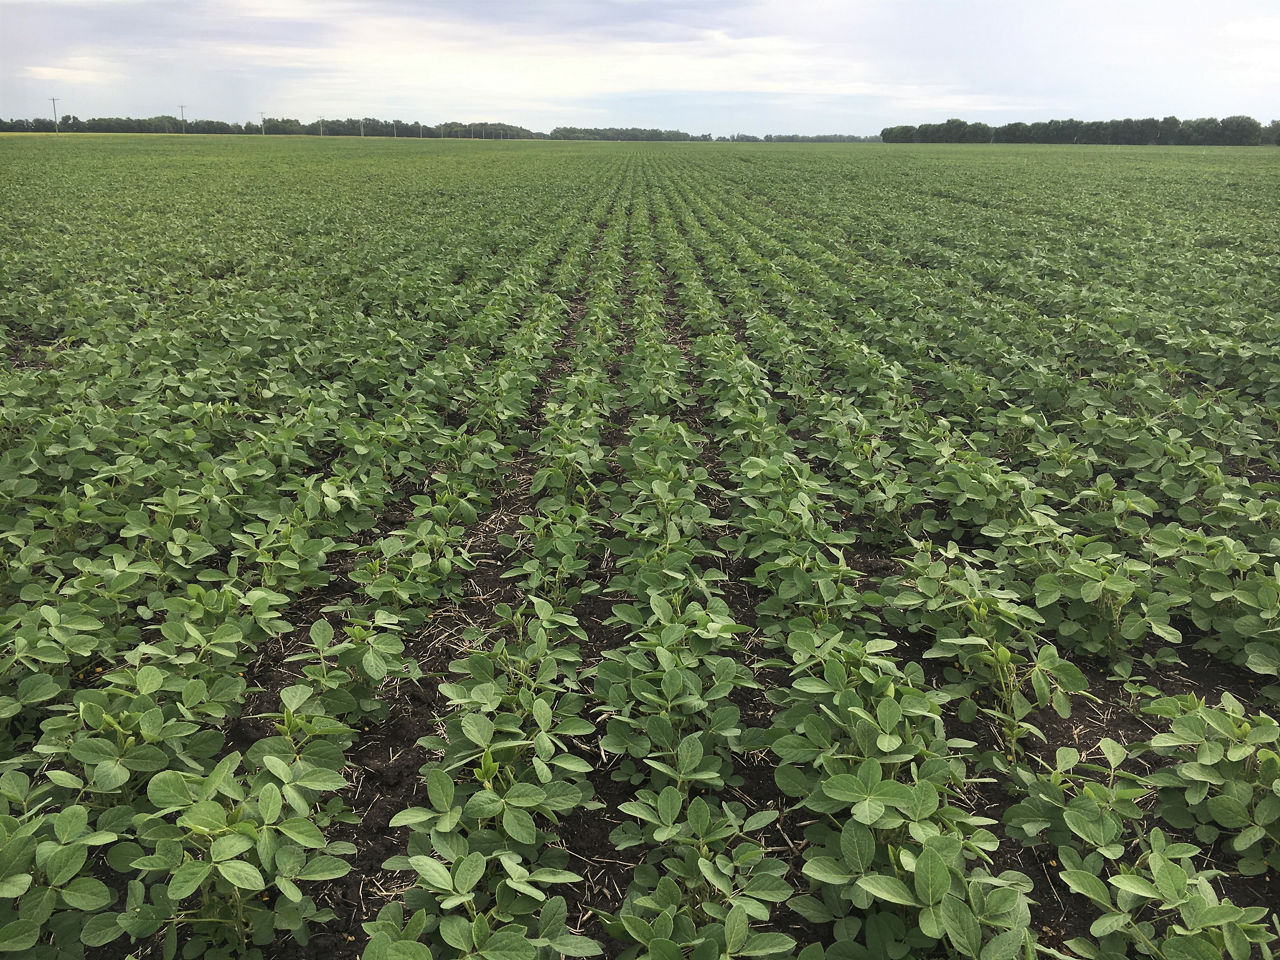 Figure 1. A healthy soybean field. Photo courtesy of Manitoba Pulse & Soybean Growers.